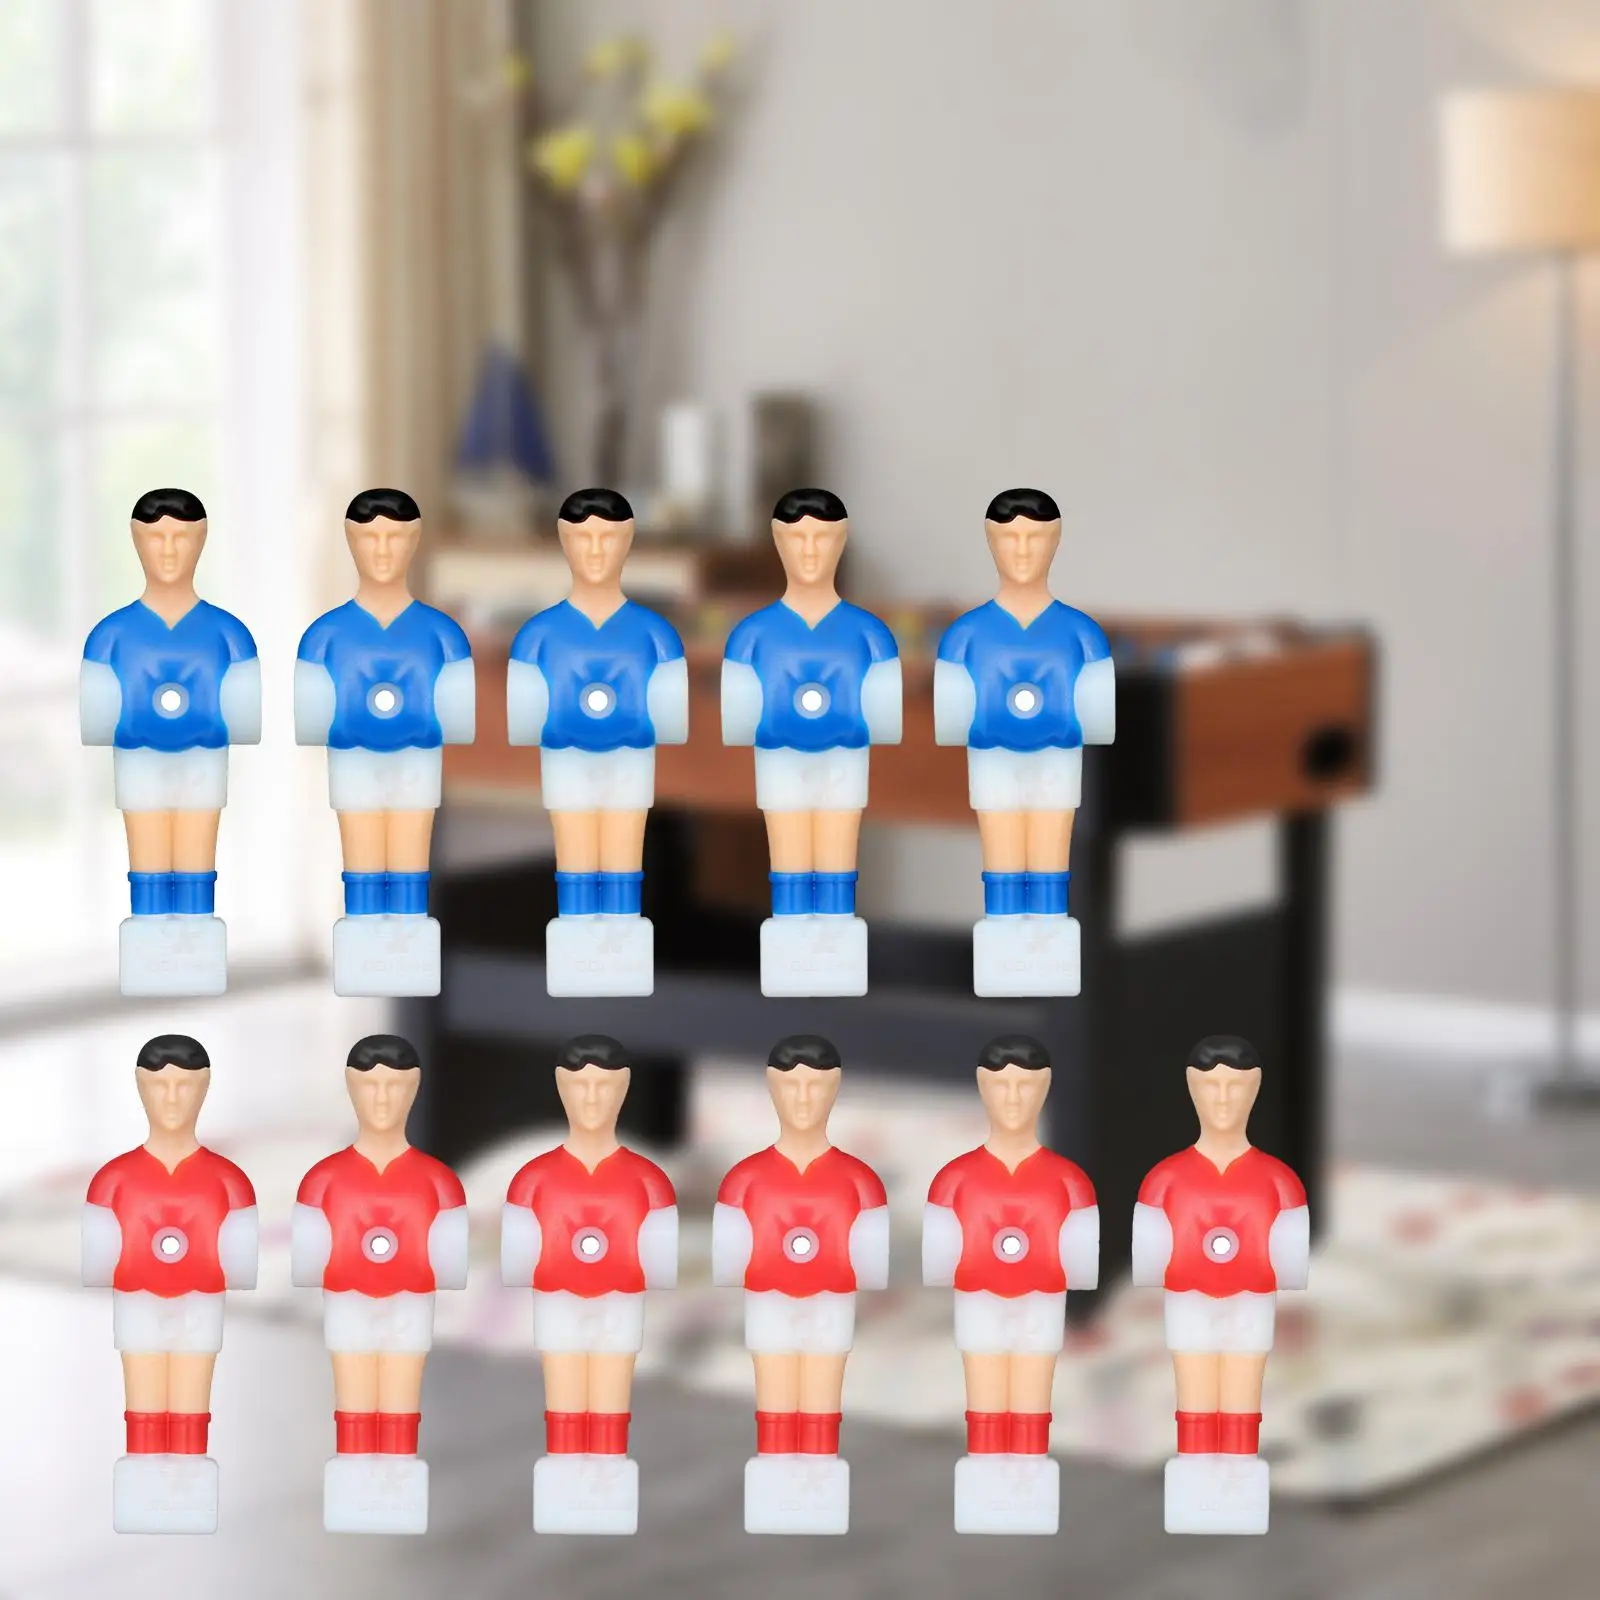 11Pcs Foosball Men Replacement Foosball Soccer Table Football Men Foosball Player Soccer Games Red and Blue for Home Game Room